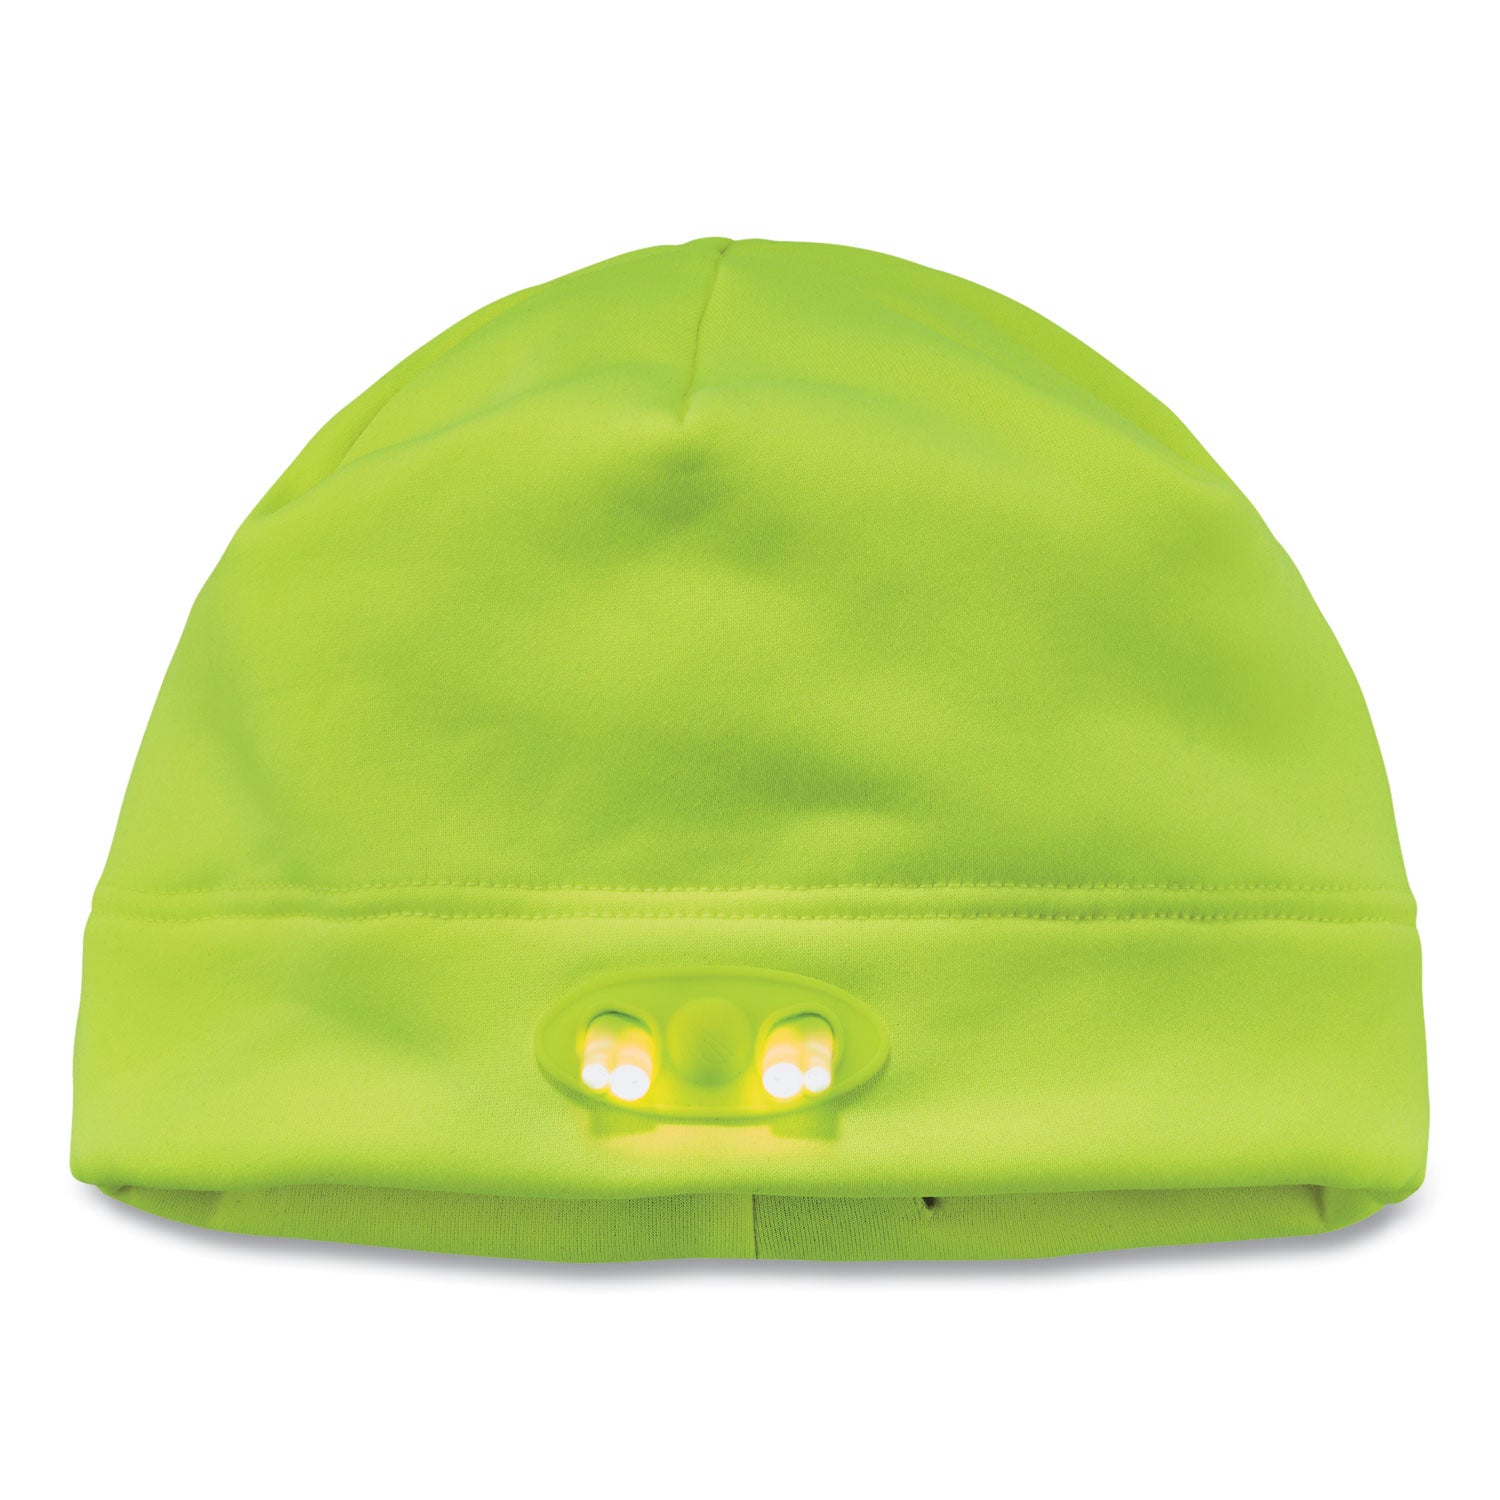 n-ferno-6804-skull-cap-winter-hat-with-led-lights-one-size-fits-mosts-lime-ships-in-1-3-business-days_ego16802 - 1